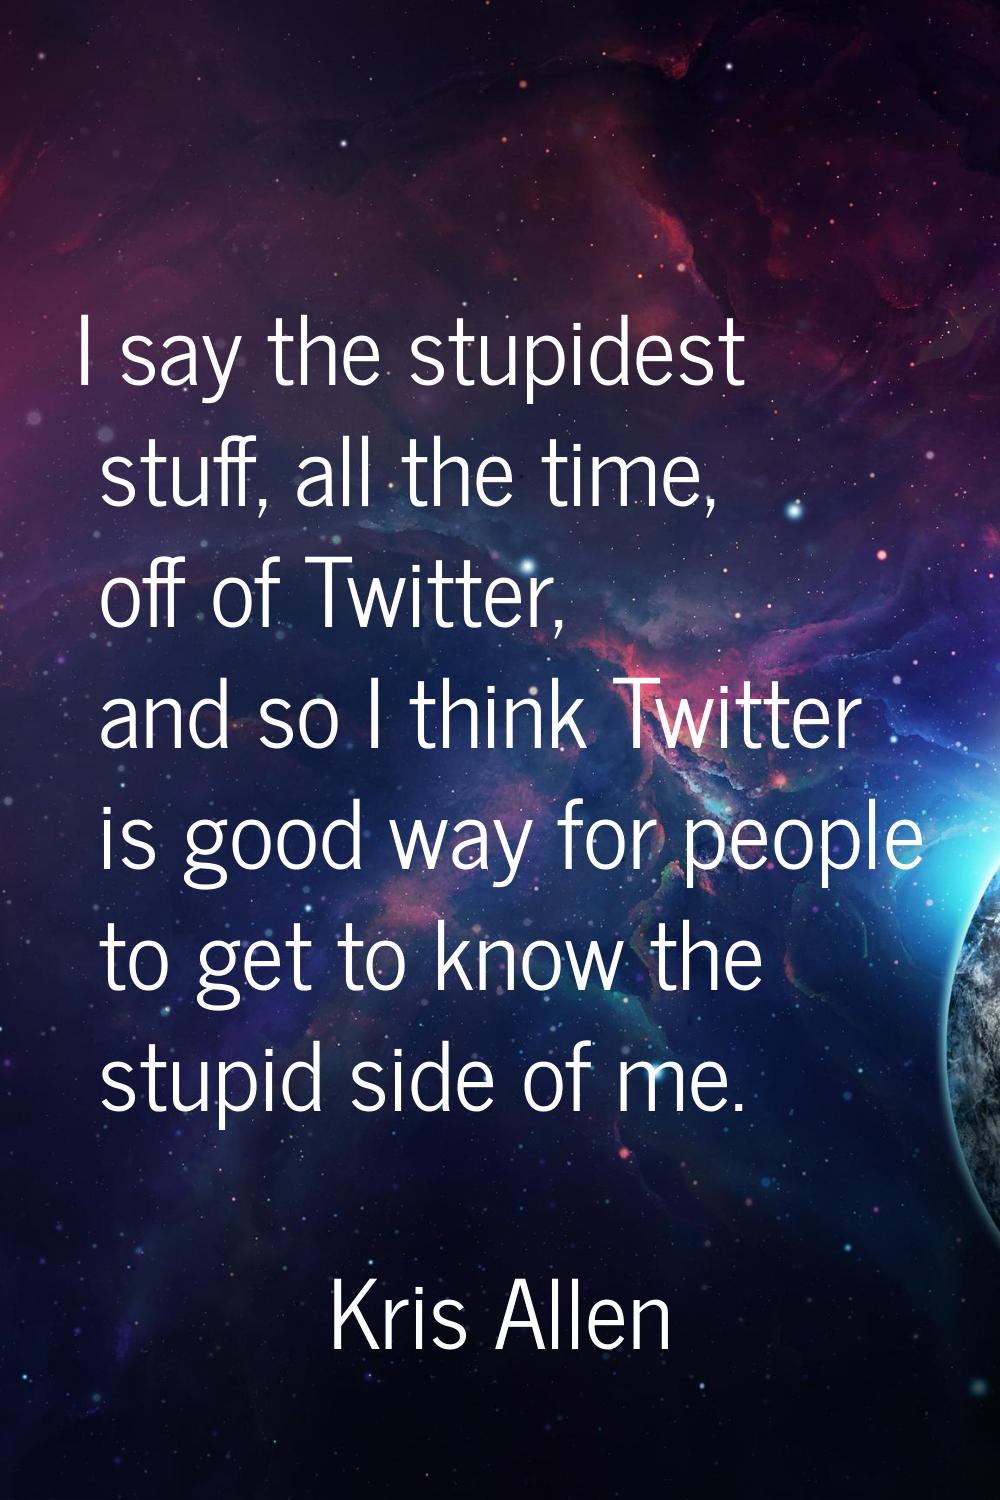 I say the stupidest stuff, all the time, off of Twitter, and so I think Twitter is good way for peo